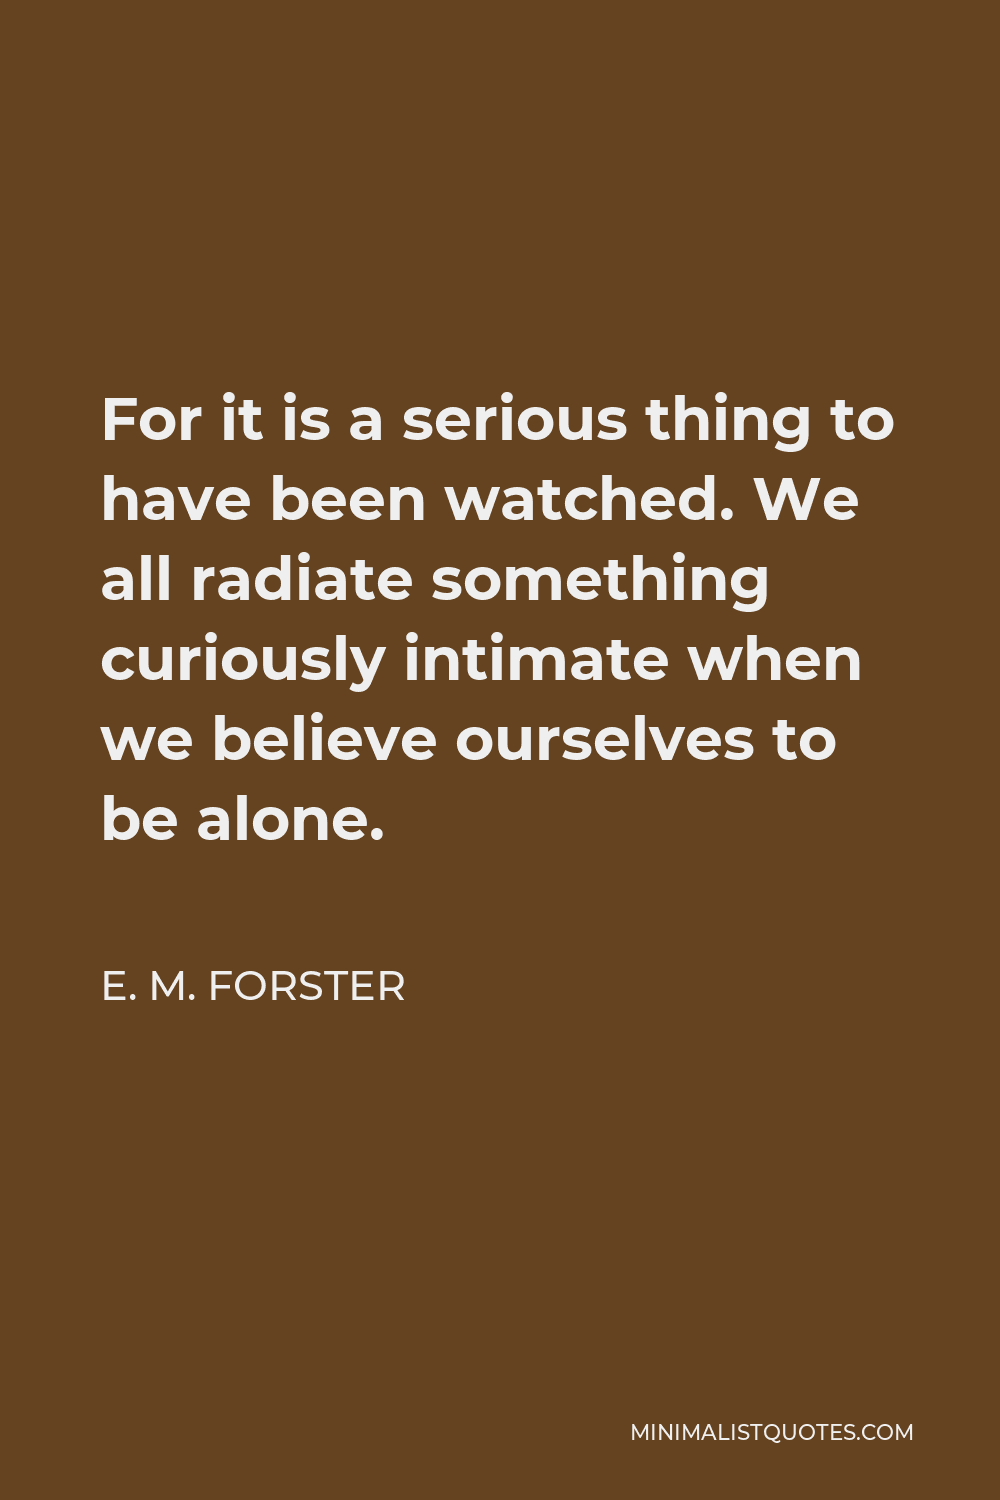 E. M. Forster Quote - For it is a serious thing to have been watched. We all radiate something curiously intimate when we believe ourselves to be alone.